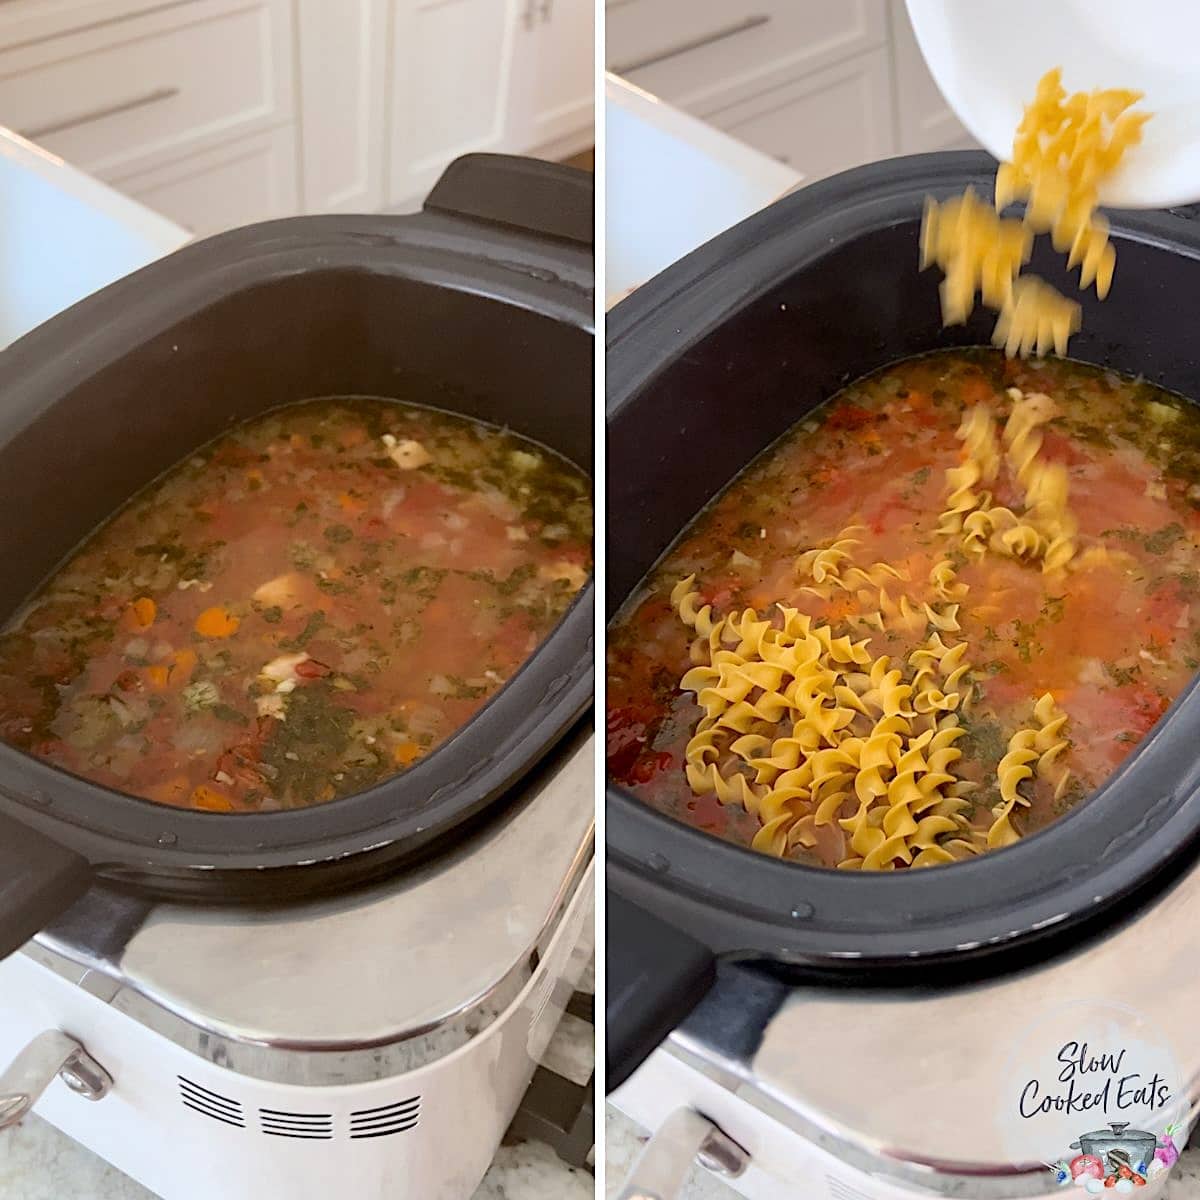 Adding the pasta to the crockpot chicken noodle soup.